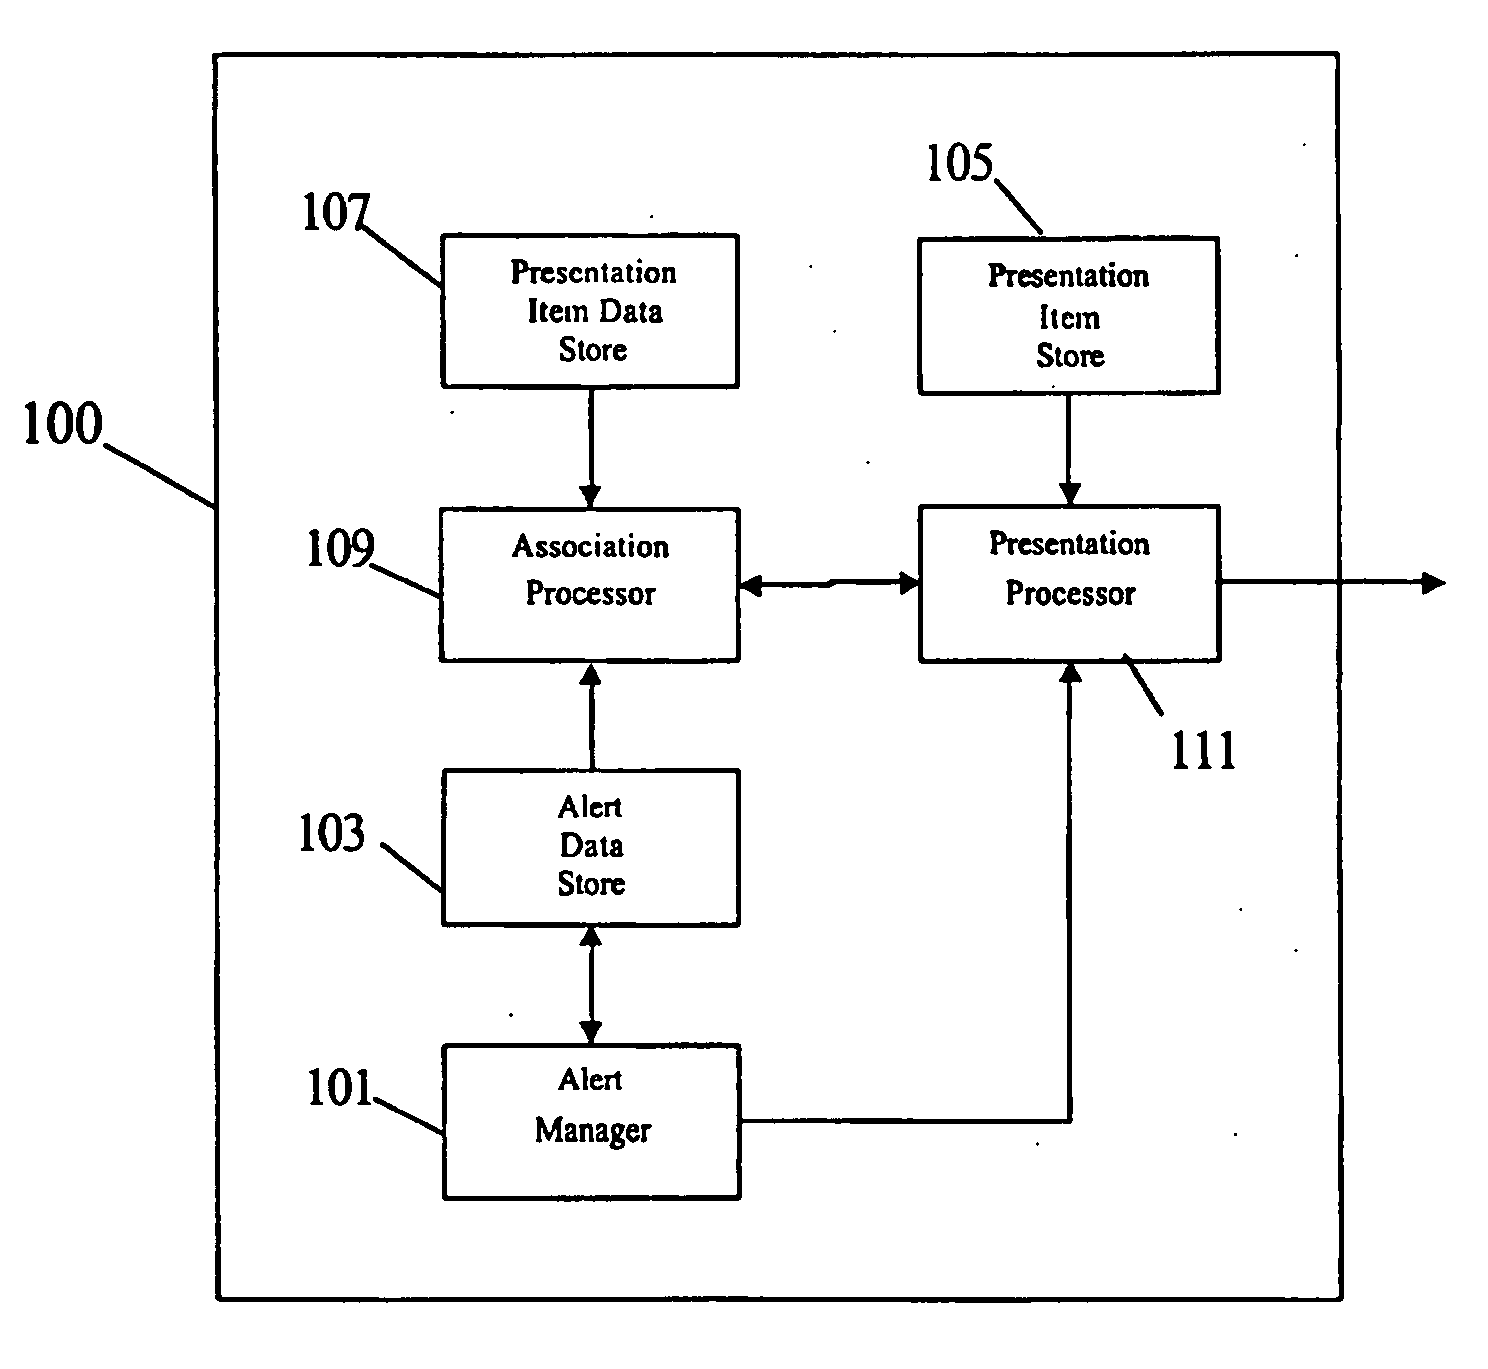 Alert management apparatus and a method of alert managment therefor